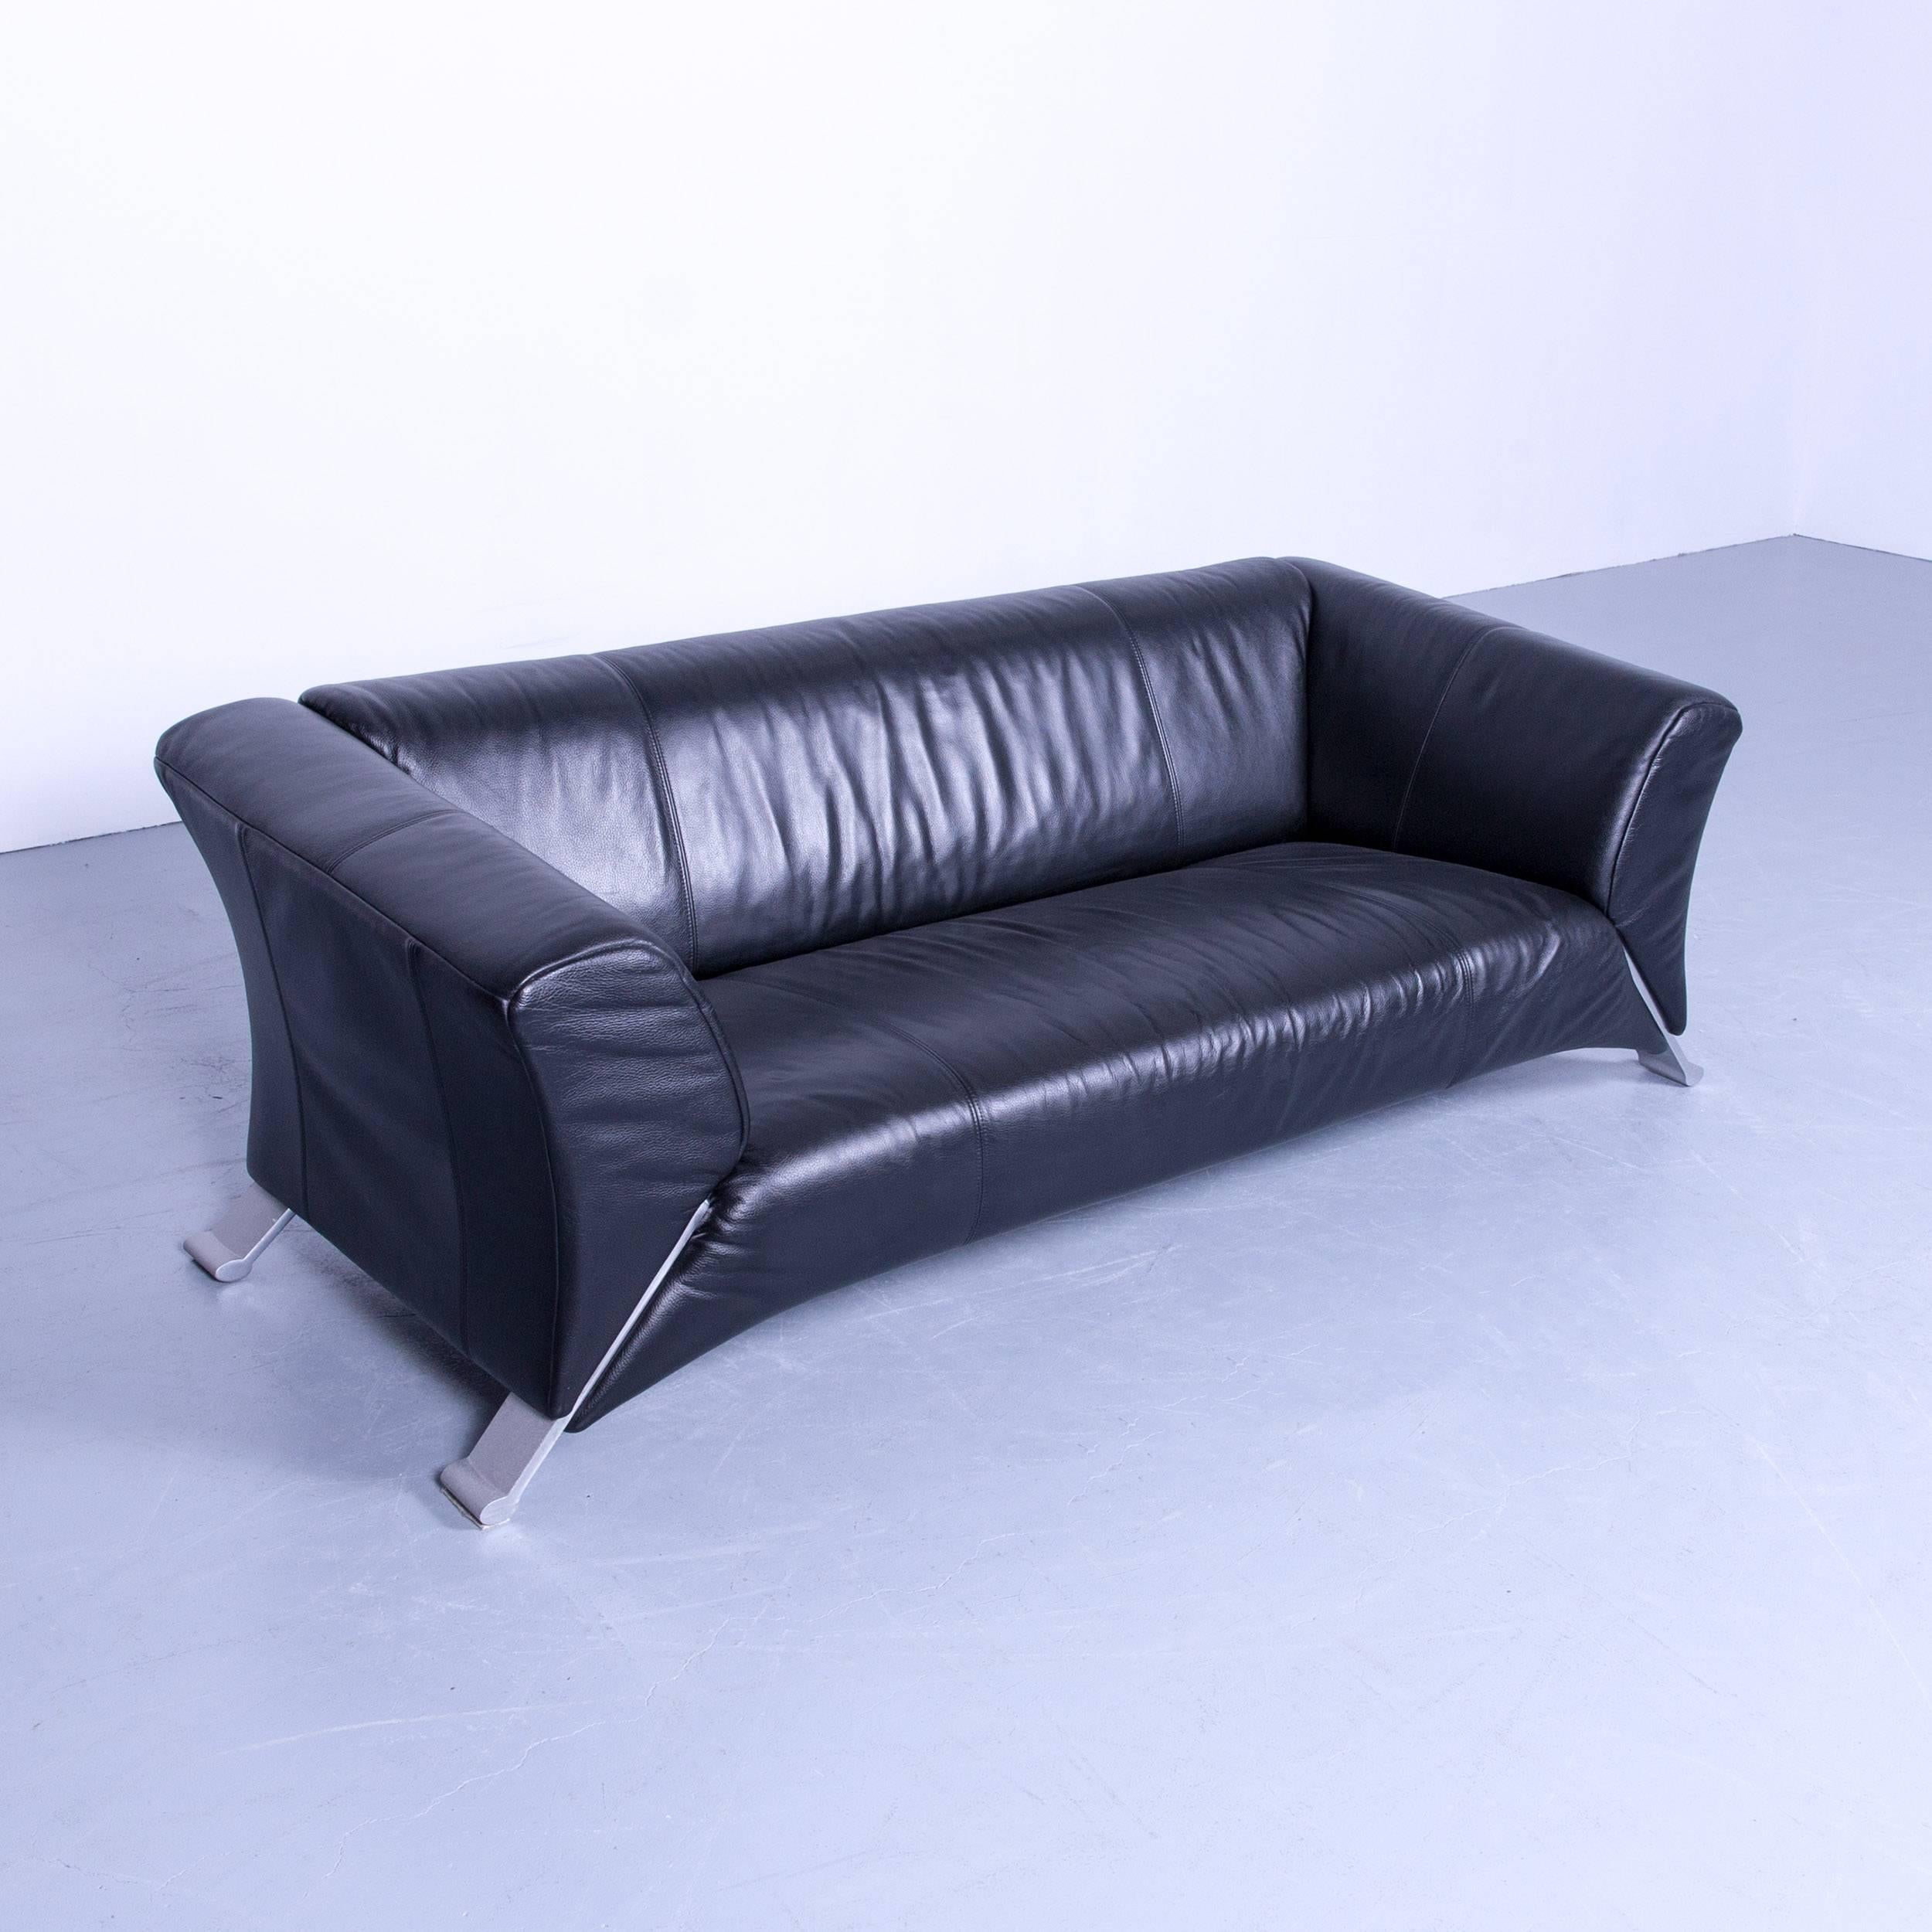 German Set of Two Rolf Benz 322 Designer Sofa Black Three and Two-Seat Leather Couch For Sale